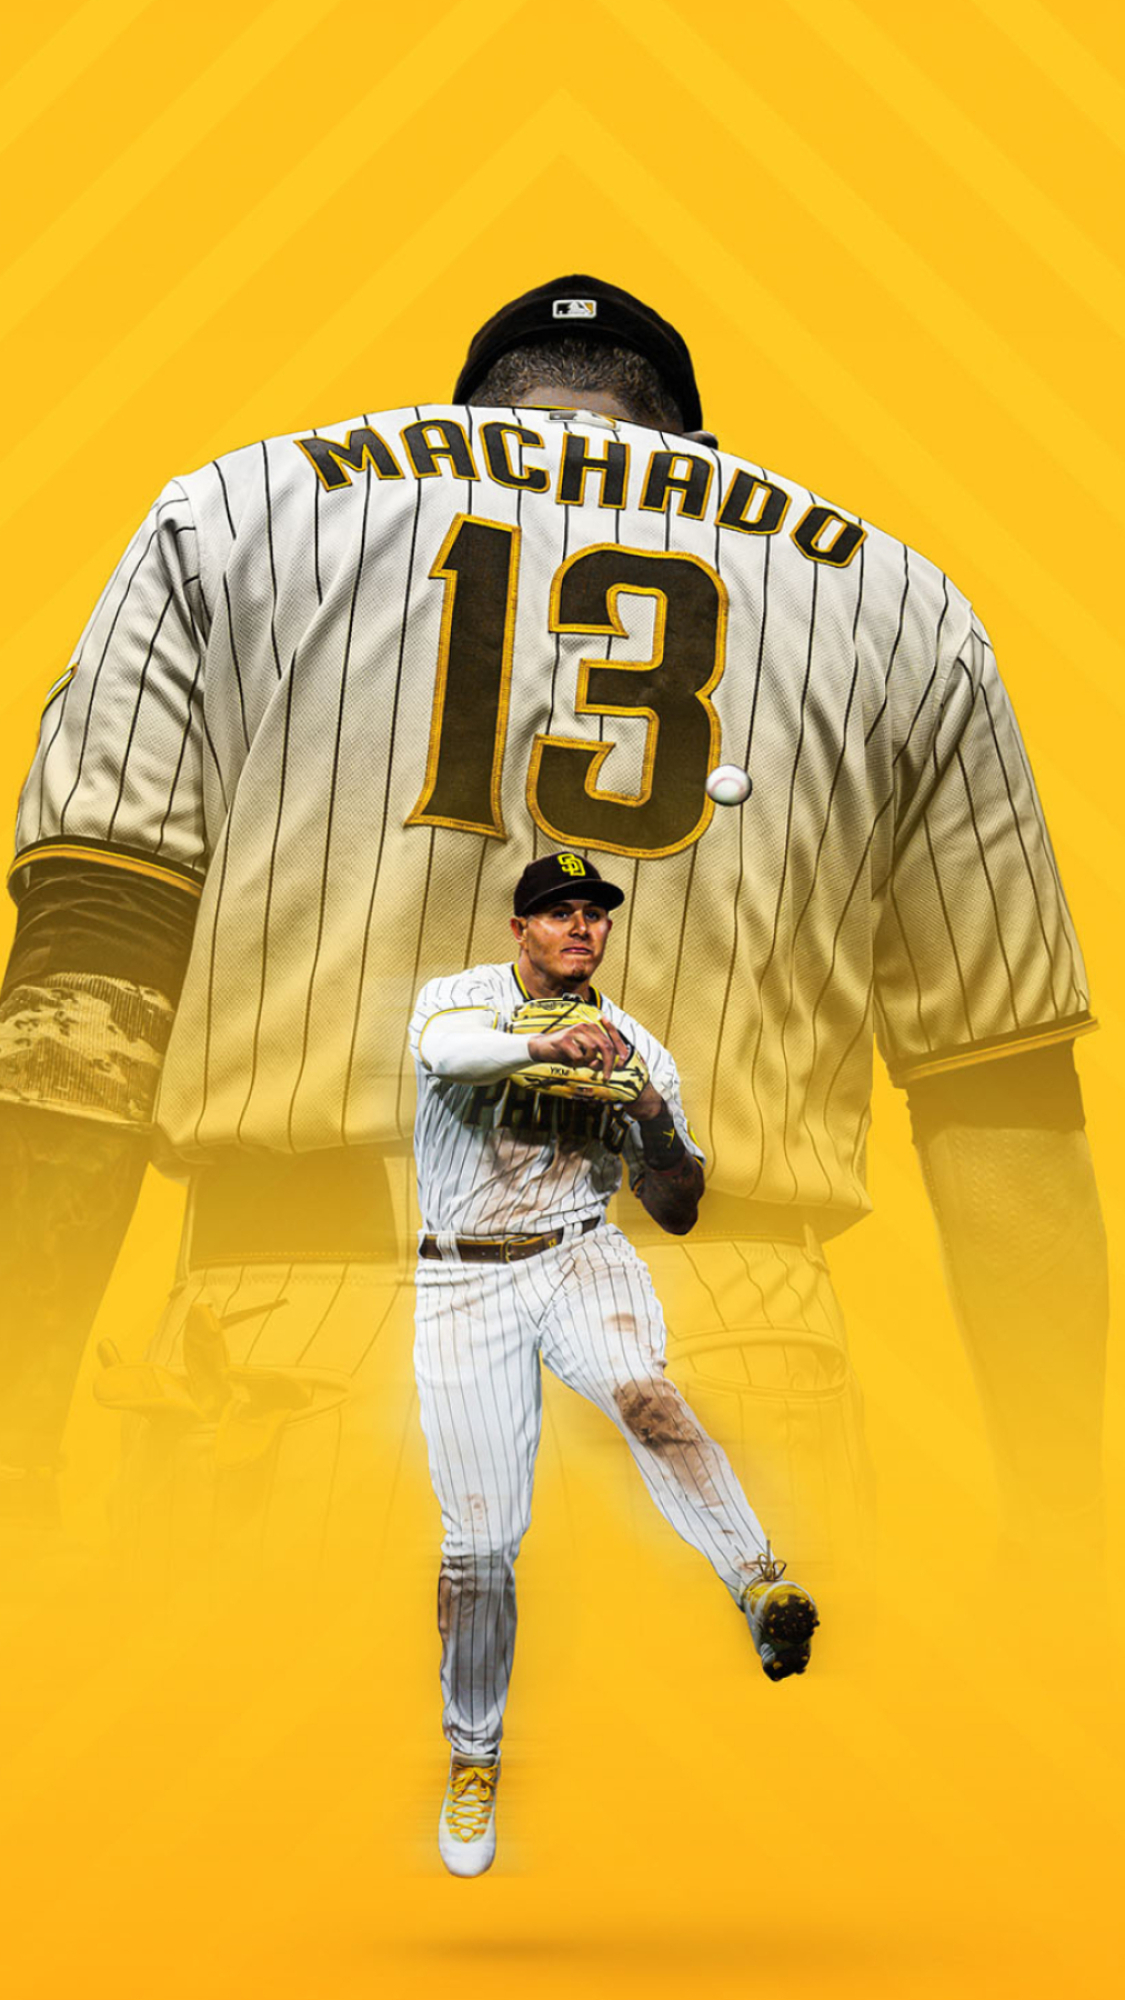 Manny Machado wallpapers, Top free, Backgrounds, Sports, 1130x2000 HD Handy